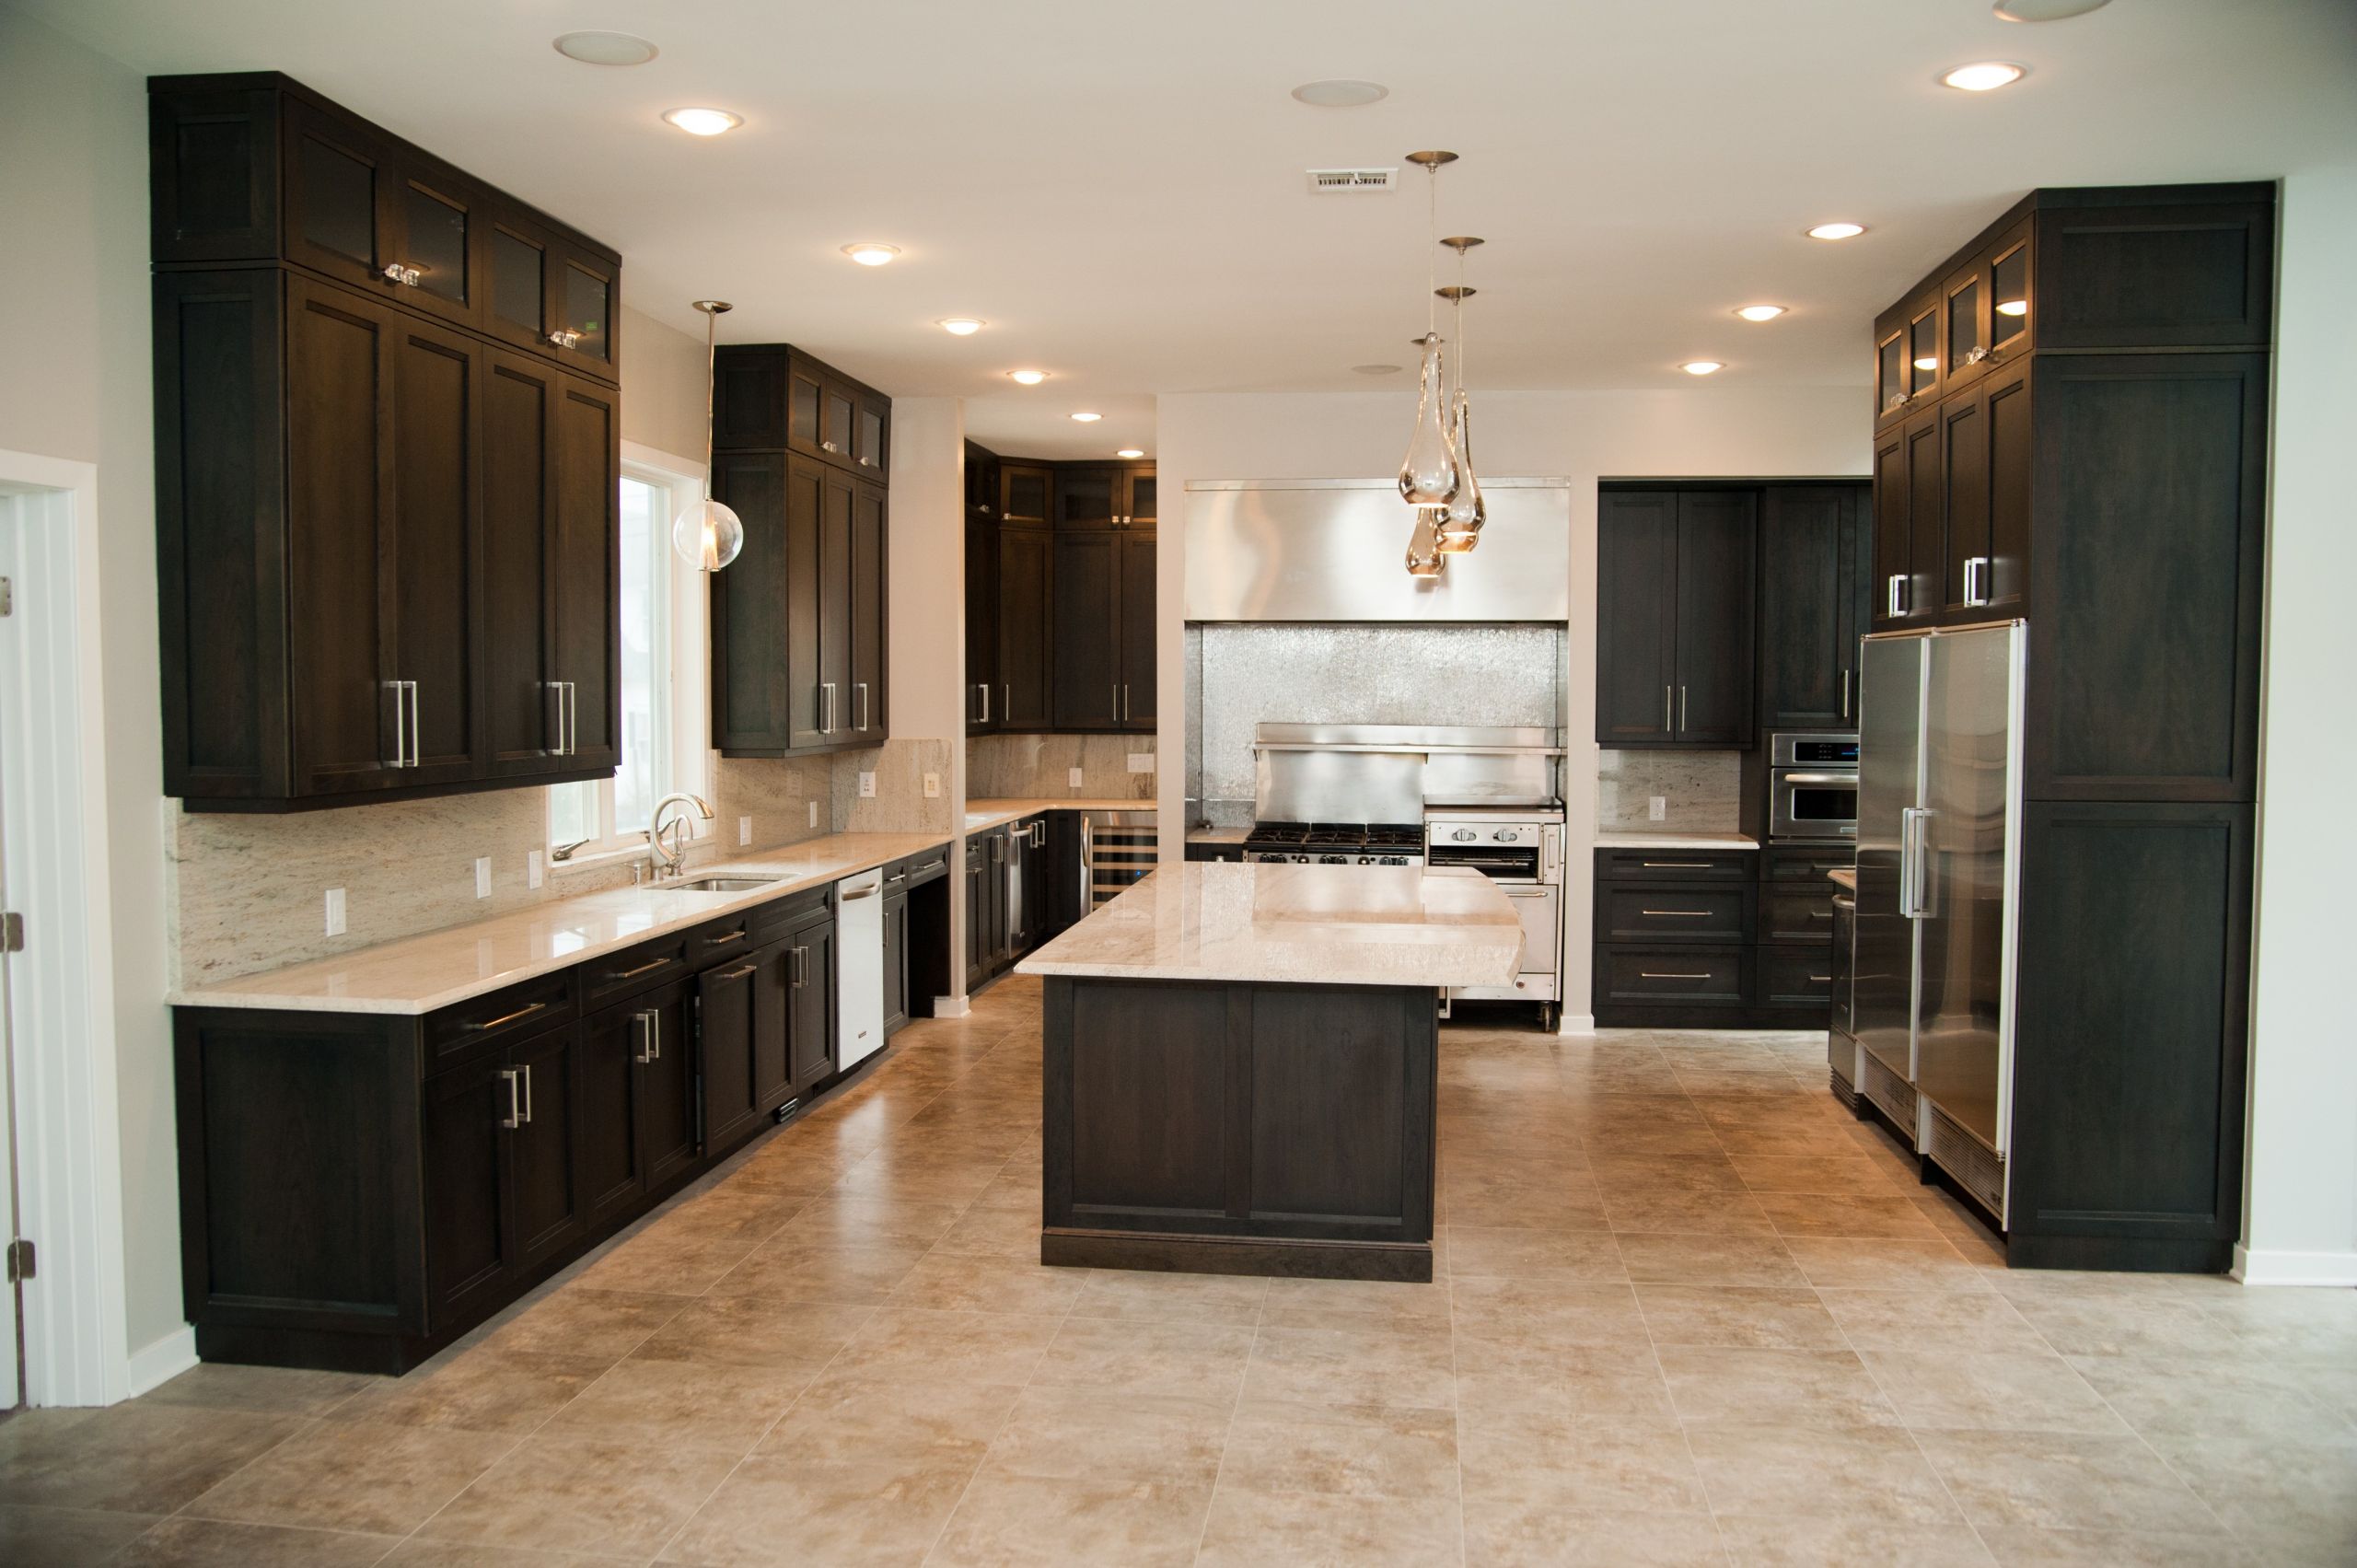 Kitchen Remodelers Nj
 NJ Kitchen Remodeling Questions and Answers from the Pros